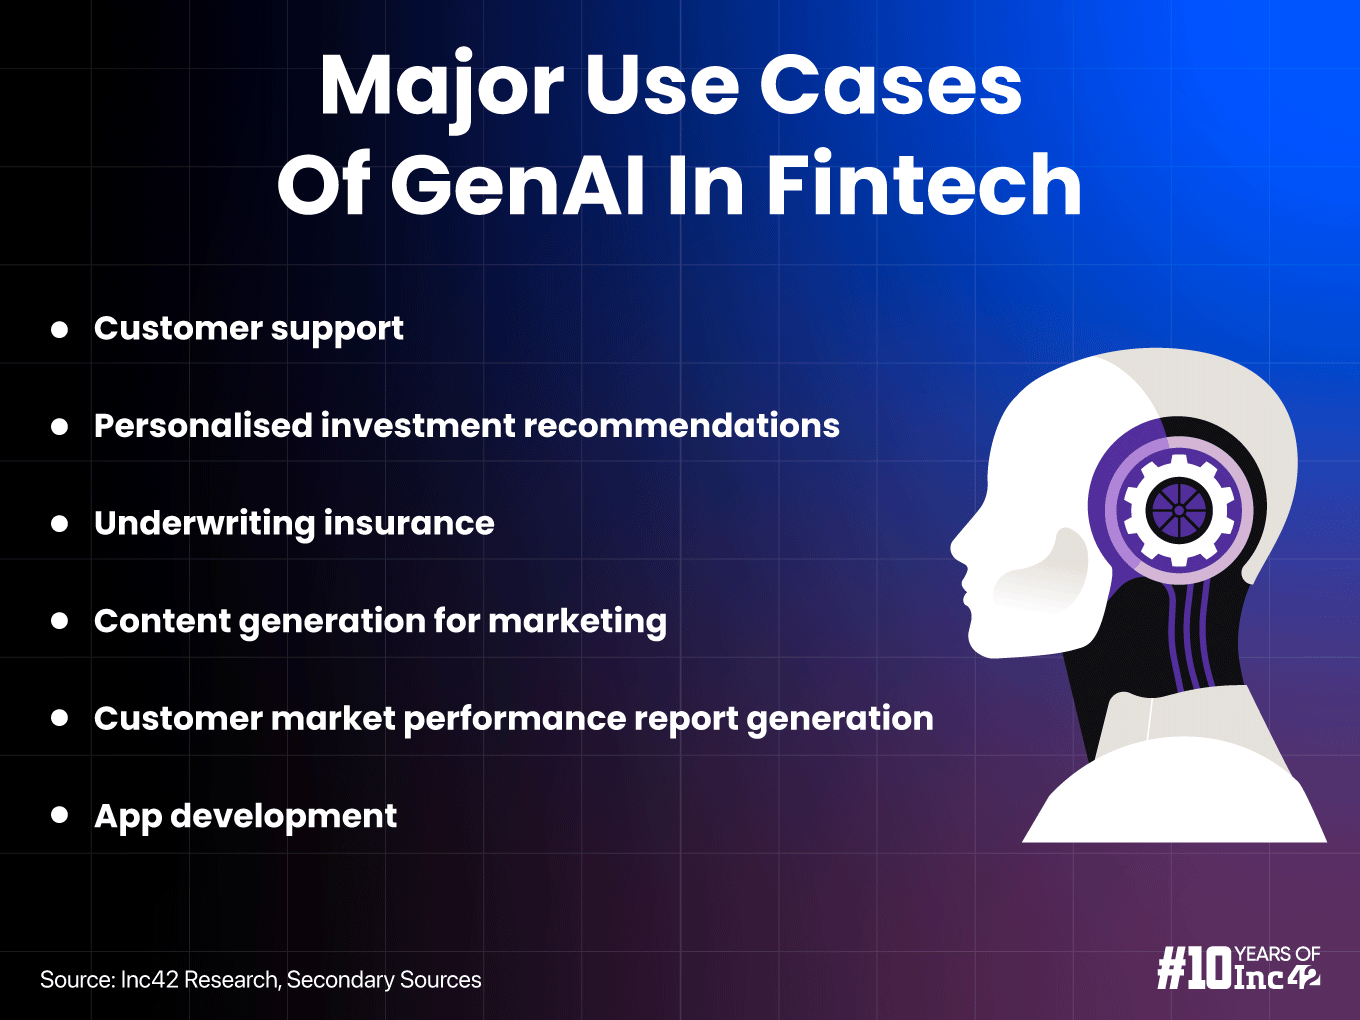 Currently, GenAI has found its prominence in fintech by enhancing the biggest challenge of customer support.